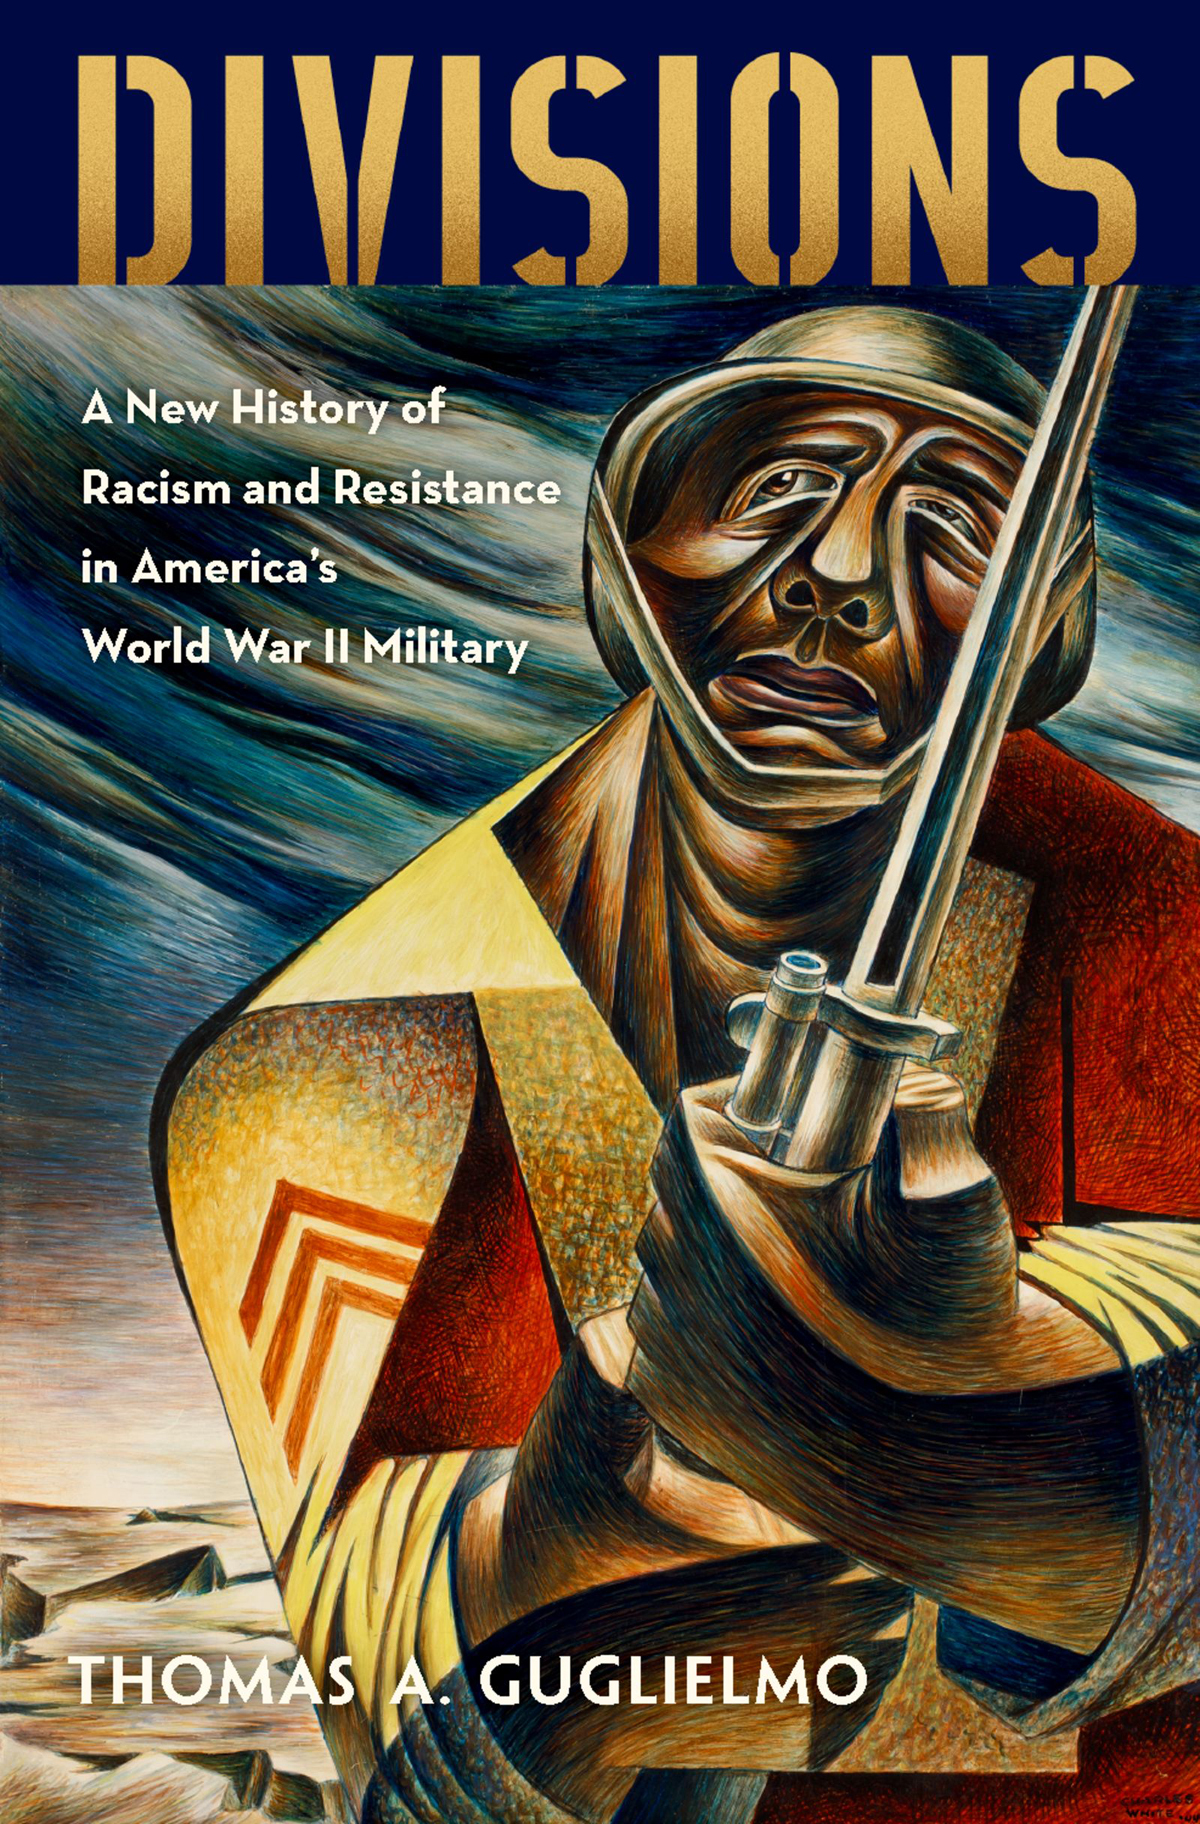 Divisions A New History of Racism and Resistance in Americas World War II Military - image 1